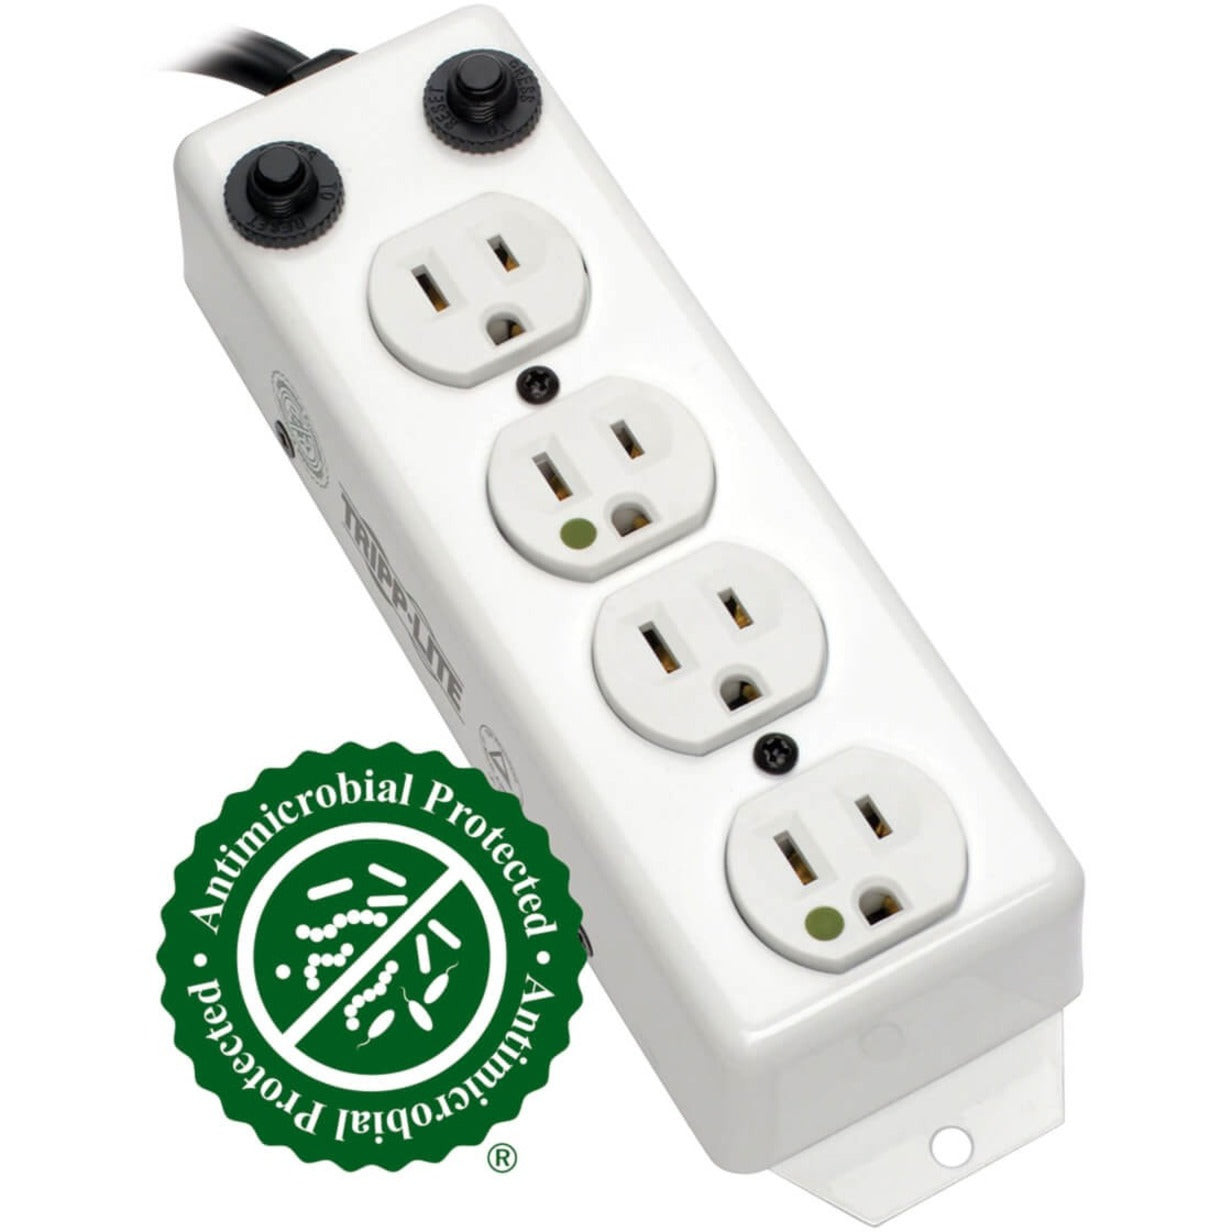 Tripp Lite PS-410-HGOEMCC 4-Outlets Power Strip, 10 ft Cord Length, 120 V AC Input Voltage, UL1363A Certified